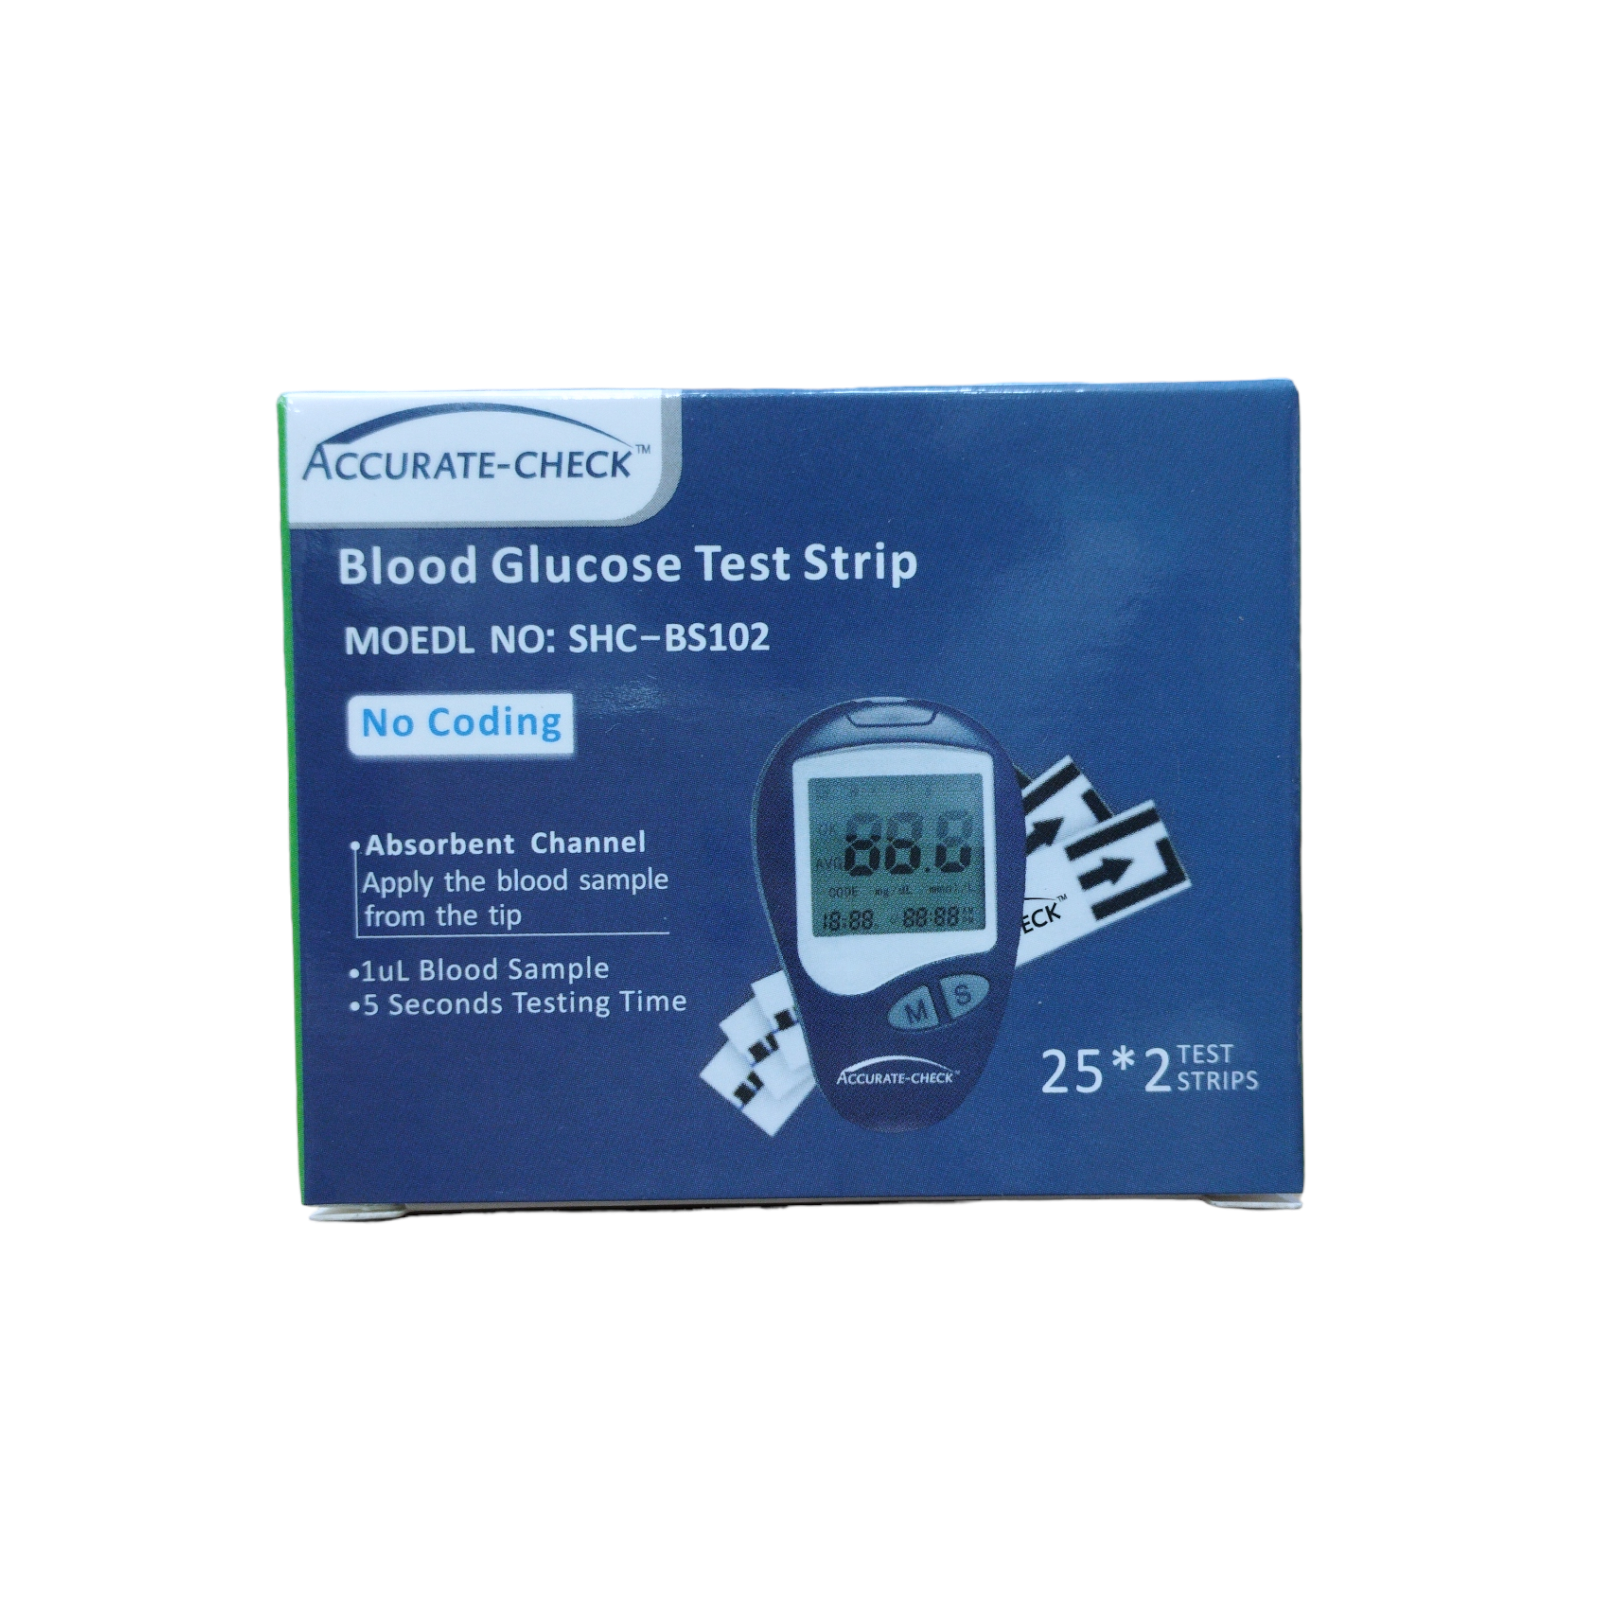 Accurate-Check Blood Glucose Test Strips